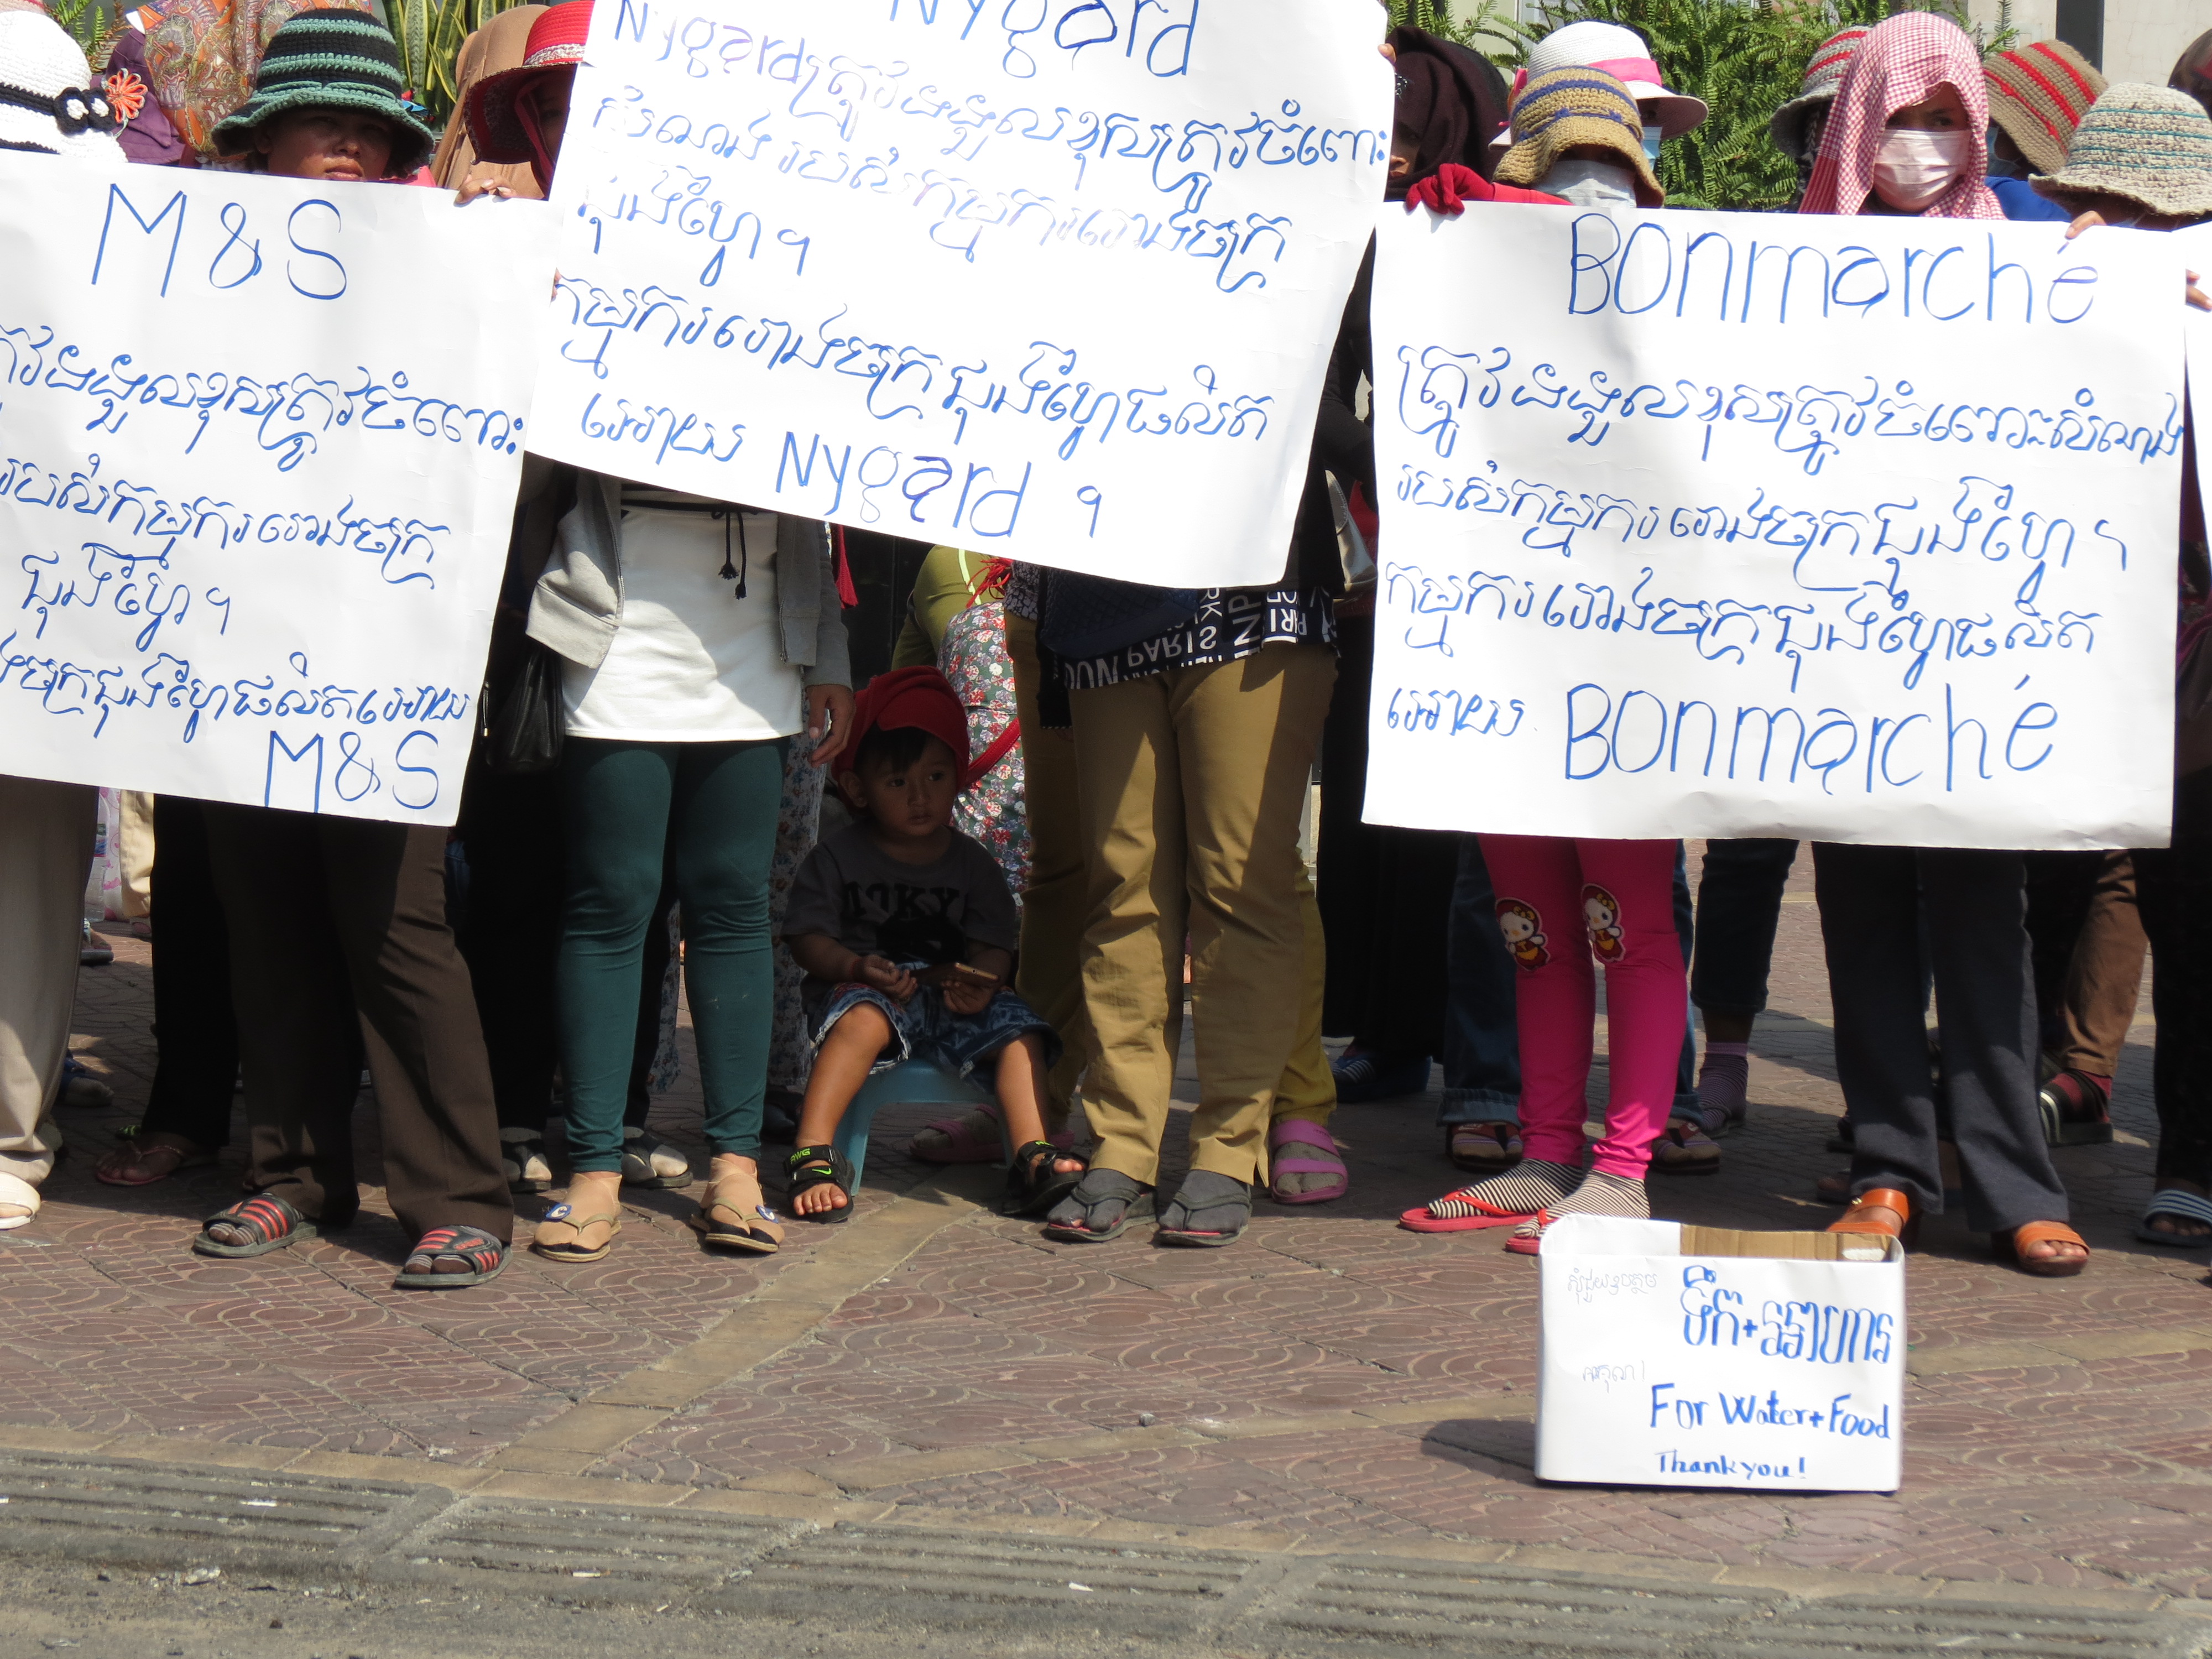 M&S, BONMARCHÉ AND NYGÅRD URGED TO COMPENSATE CAMBODIAN WORKERS OF CLOSED RGM UNITS